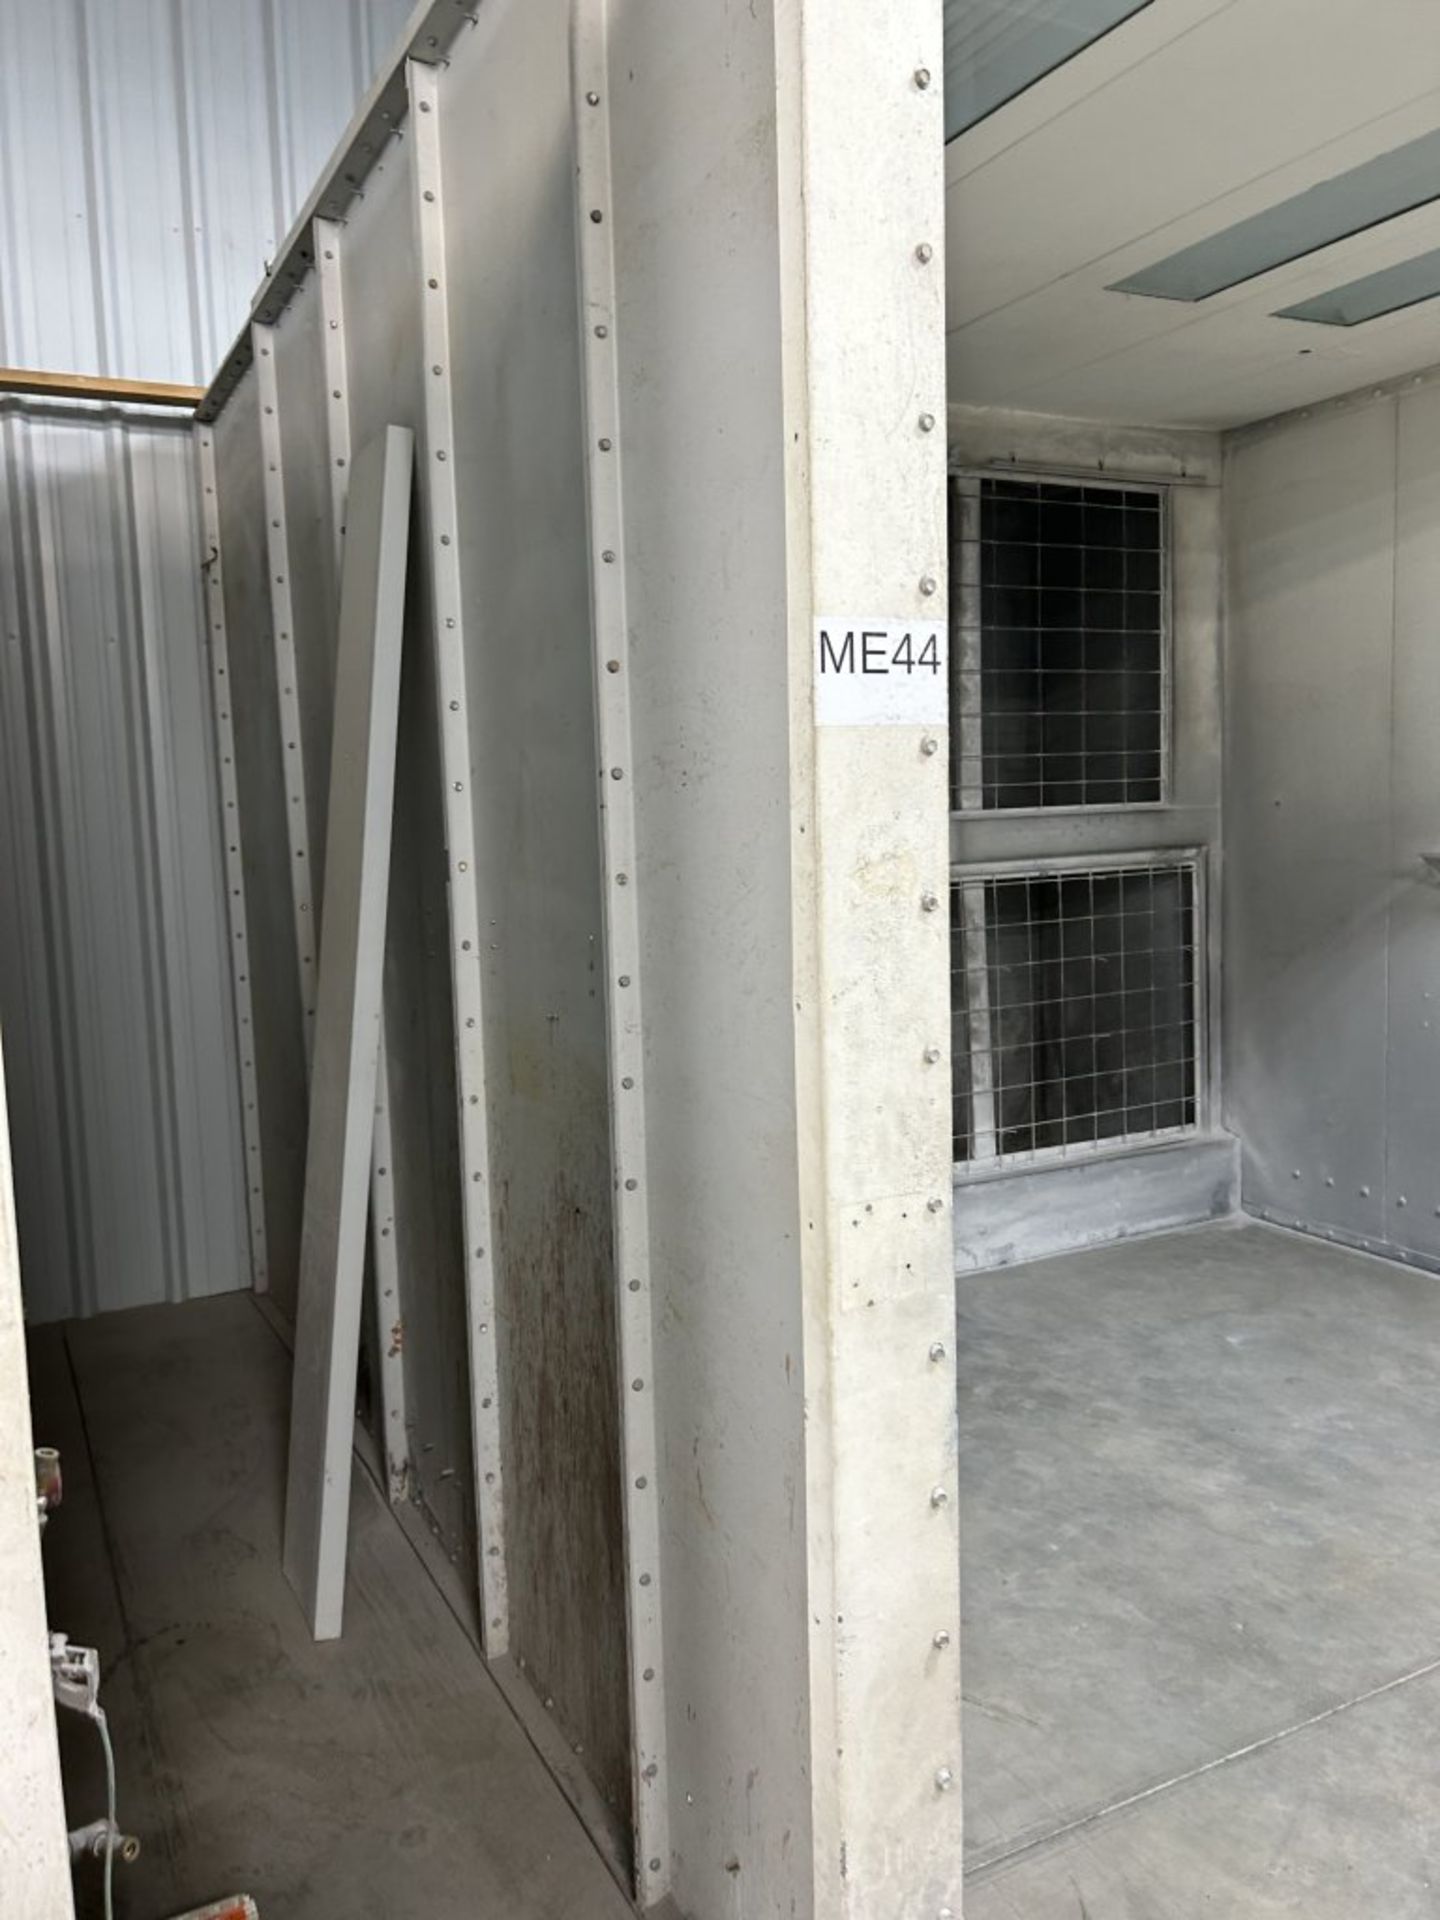 MID-STATE INDUSTRIAL PAINT BOOTH, 13' X 13.5' X 10.5', BUYER IS RESPONSIBLE FOR PROPER REMOVAL - Image 8 of 11